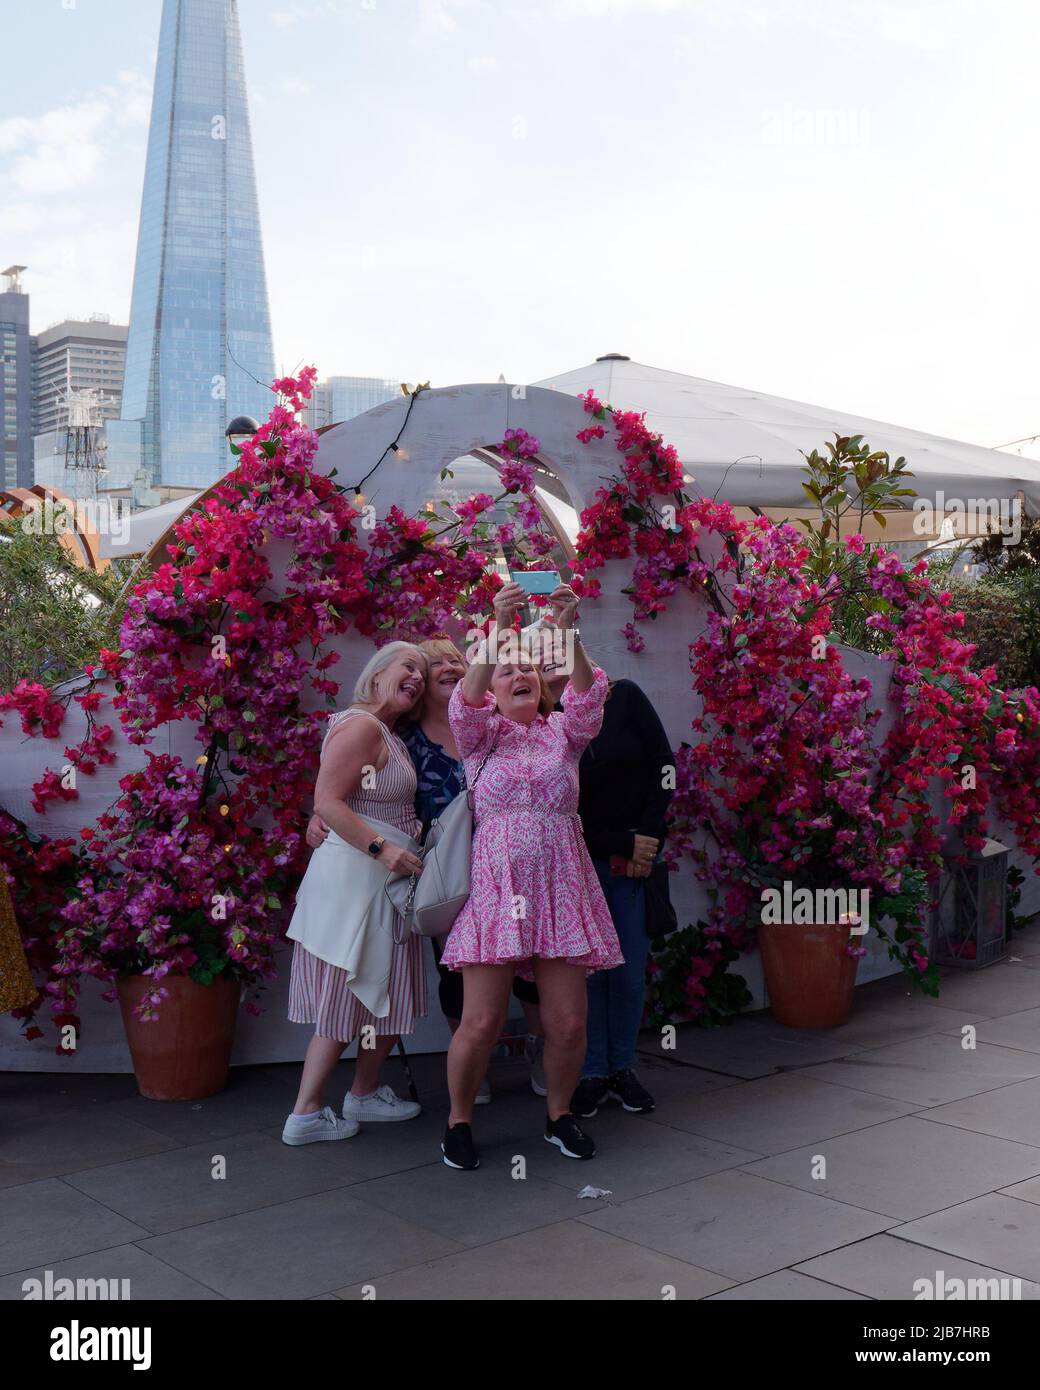 Women smiling and laughing as they take a selfie in front of artificial red and pink flowers at the Coppa Club with The Shard in the background. Stock Photo